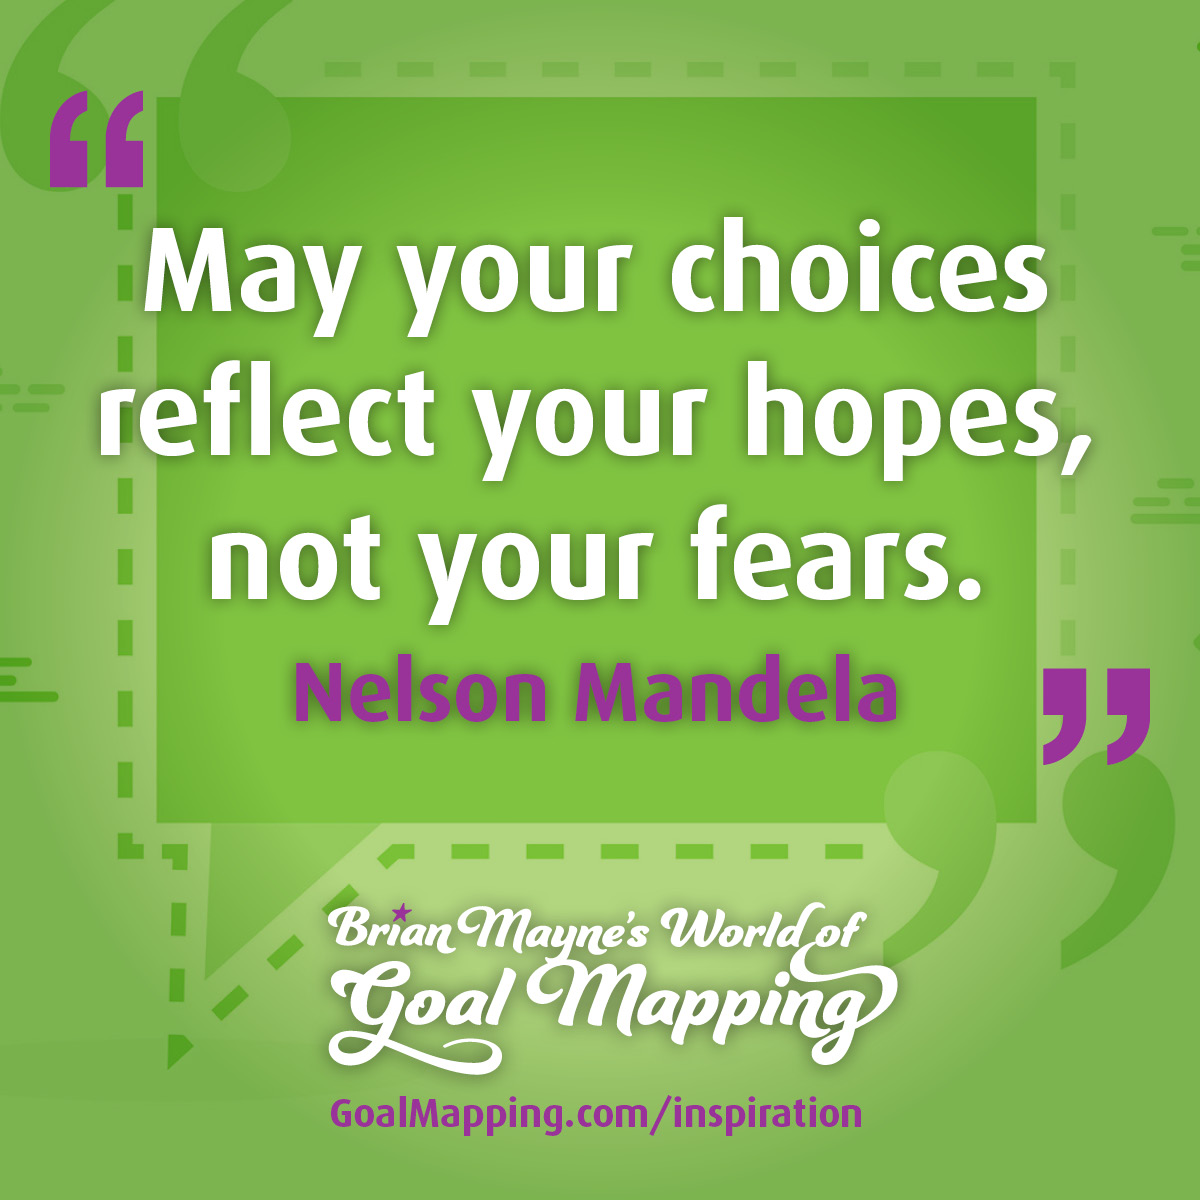 "May your choices reflect your hopes, not your fears." Nelson Mandela